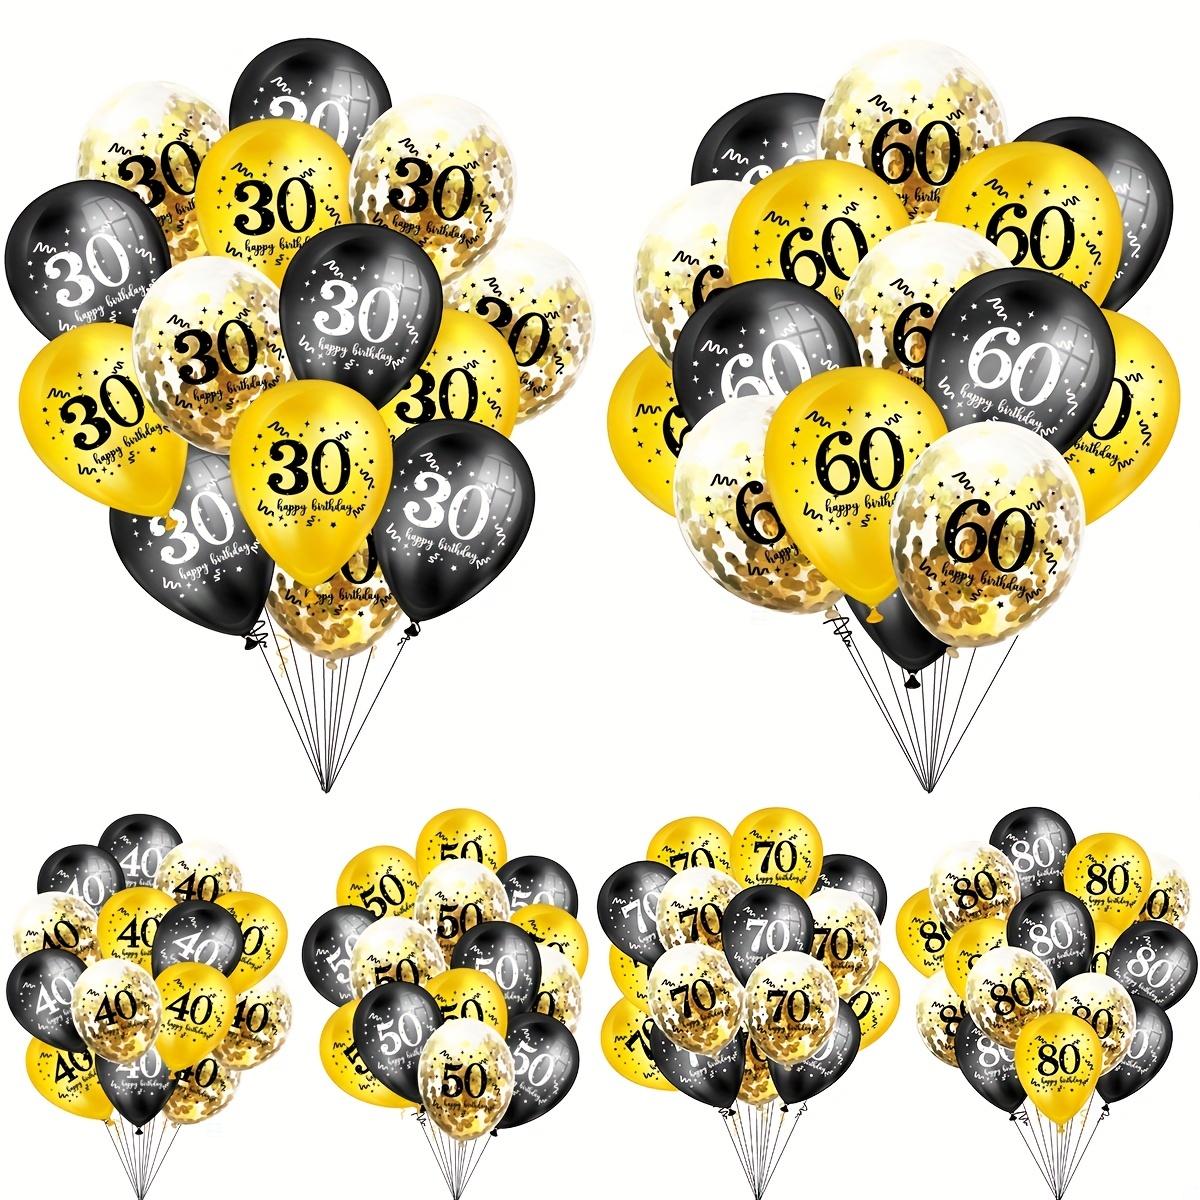 

15pcs, 12 Inch 30 40 50 60 70 80 Years Old Number Birthday Balloon Birthday Party Anniversary Decorations, Birthday Party Decor Balloon